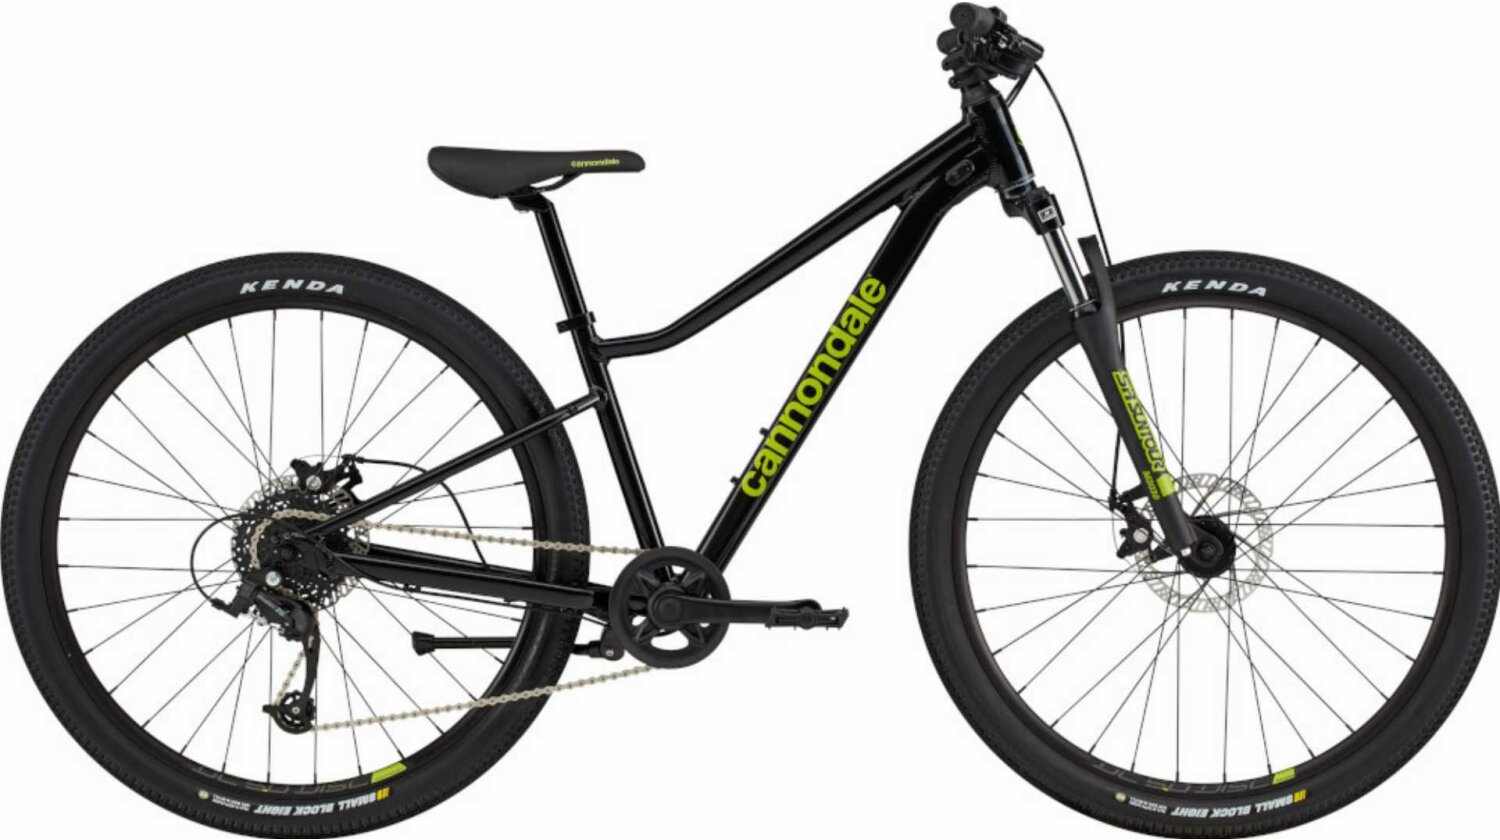 Cannondale Trail Jugendrad Diamant 26" black pearl...